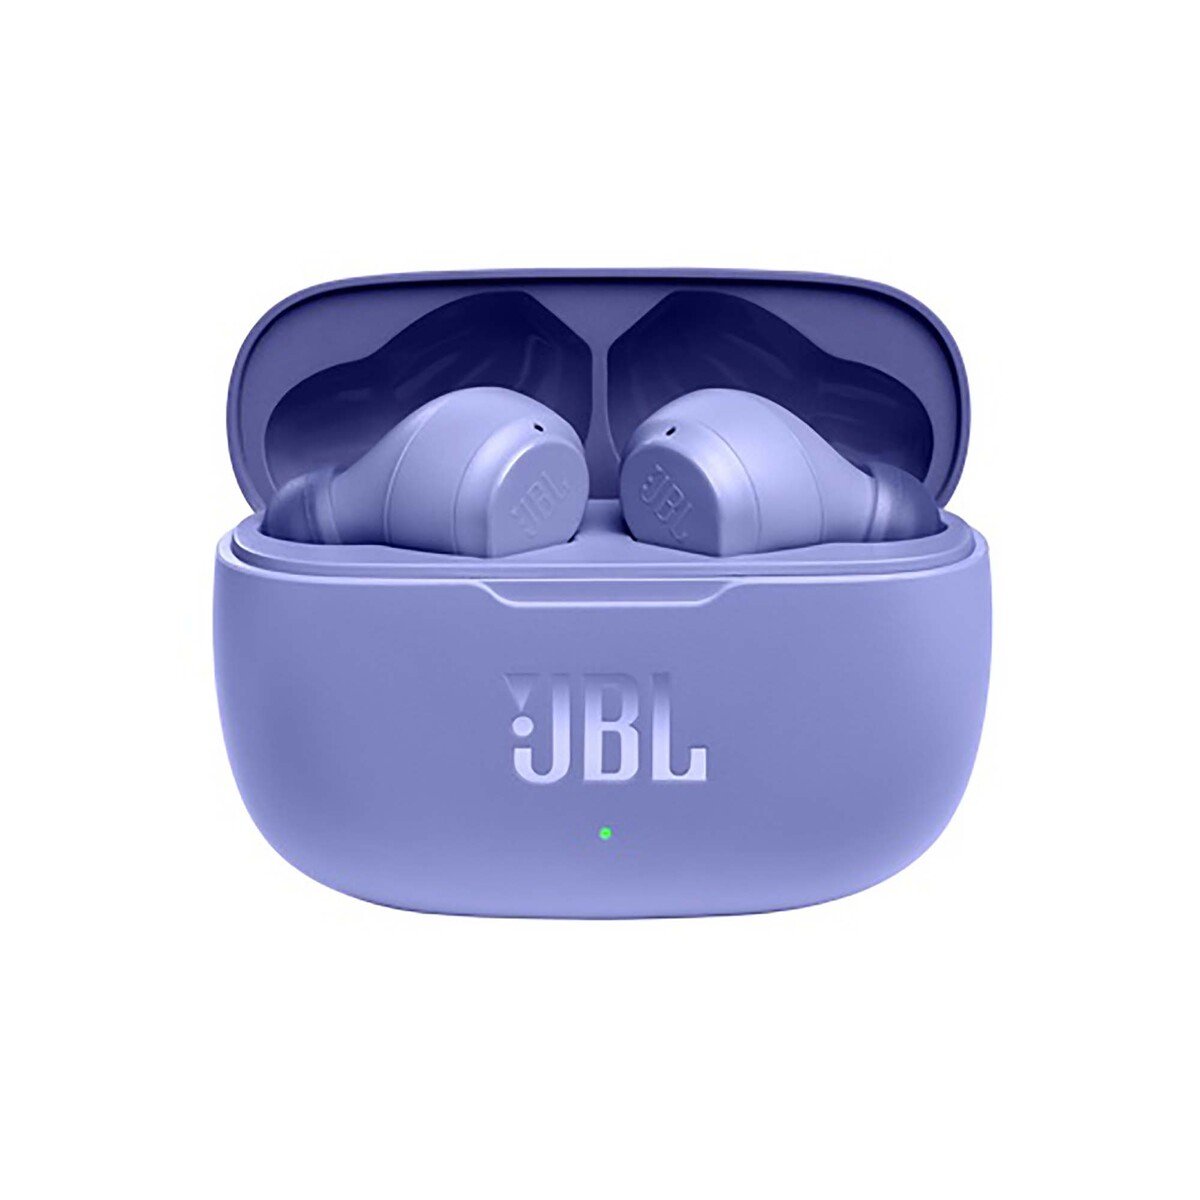 What do you think about this replica of JBL Wave 300? : r/JBL